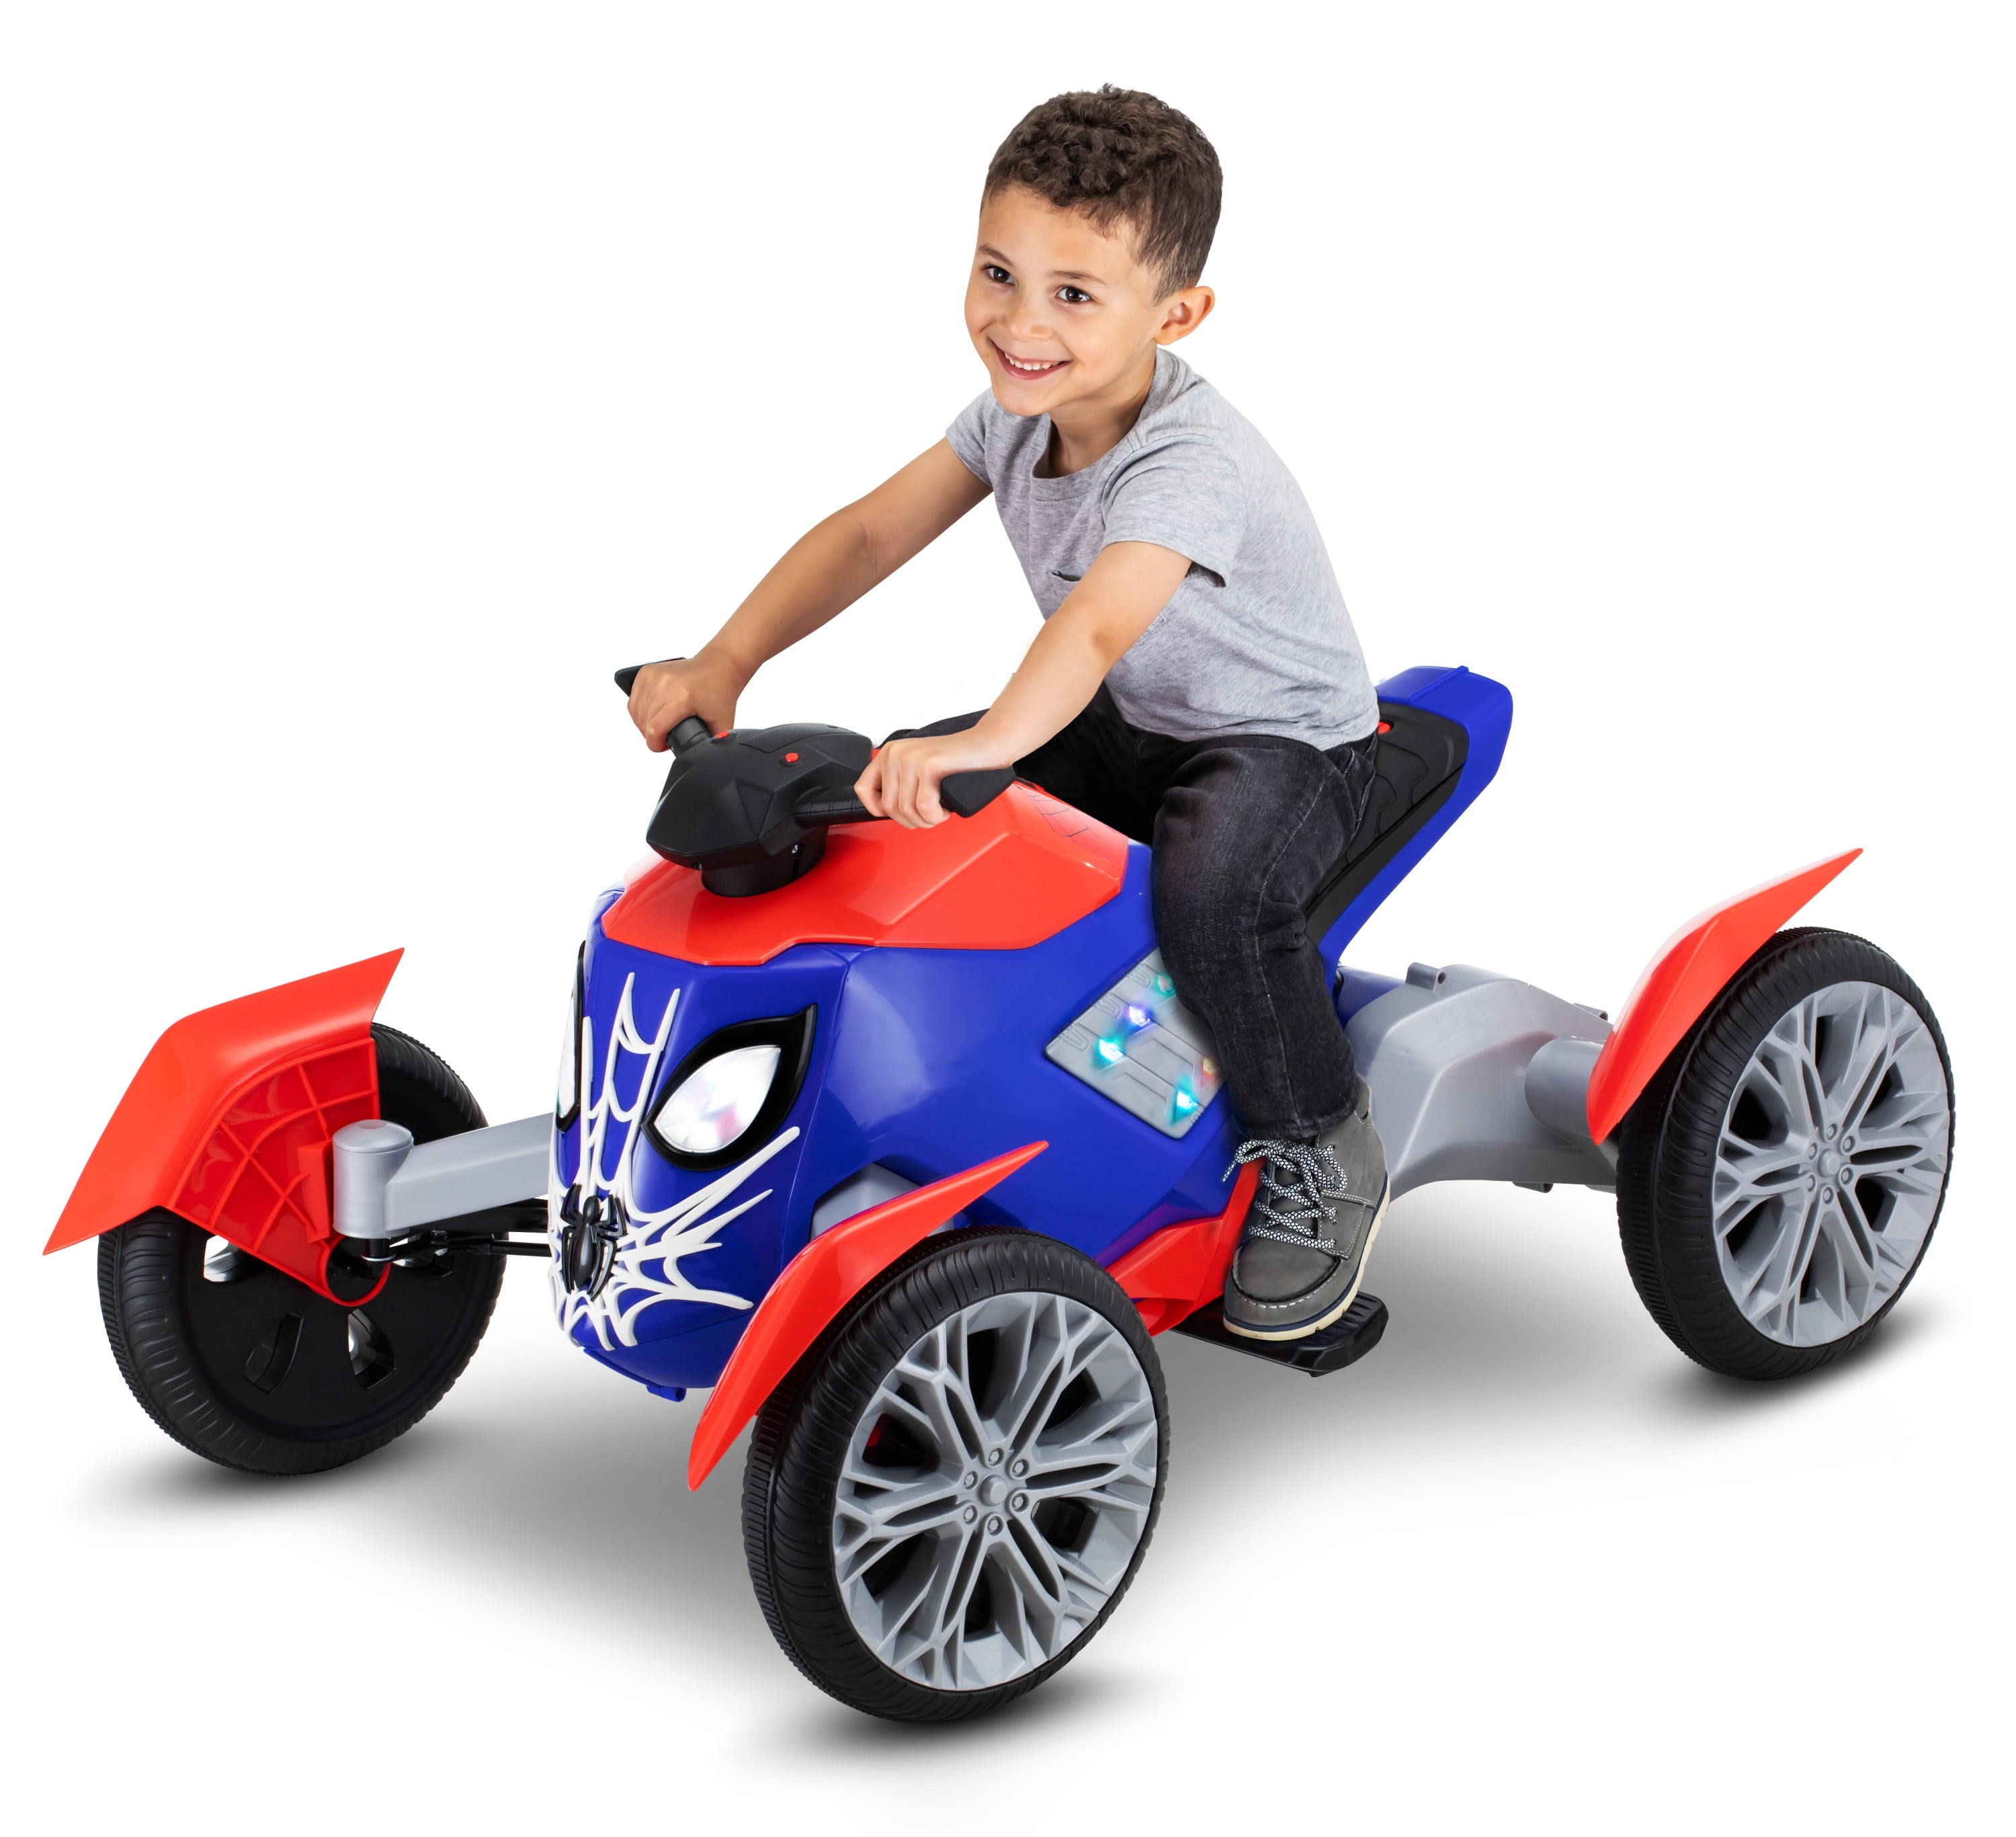 Marvel Spiderbike Ride-On Toy by Kid Trax powered rechargeable, preschool,  6 volts, Spiderman 